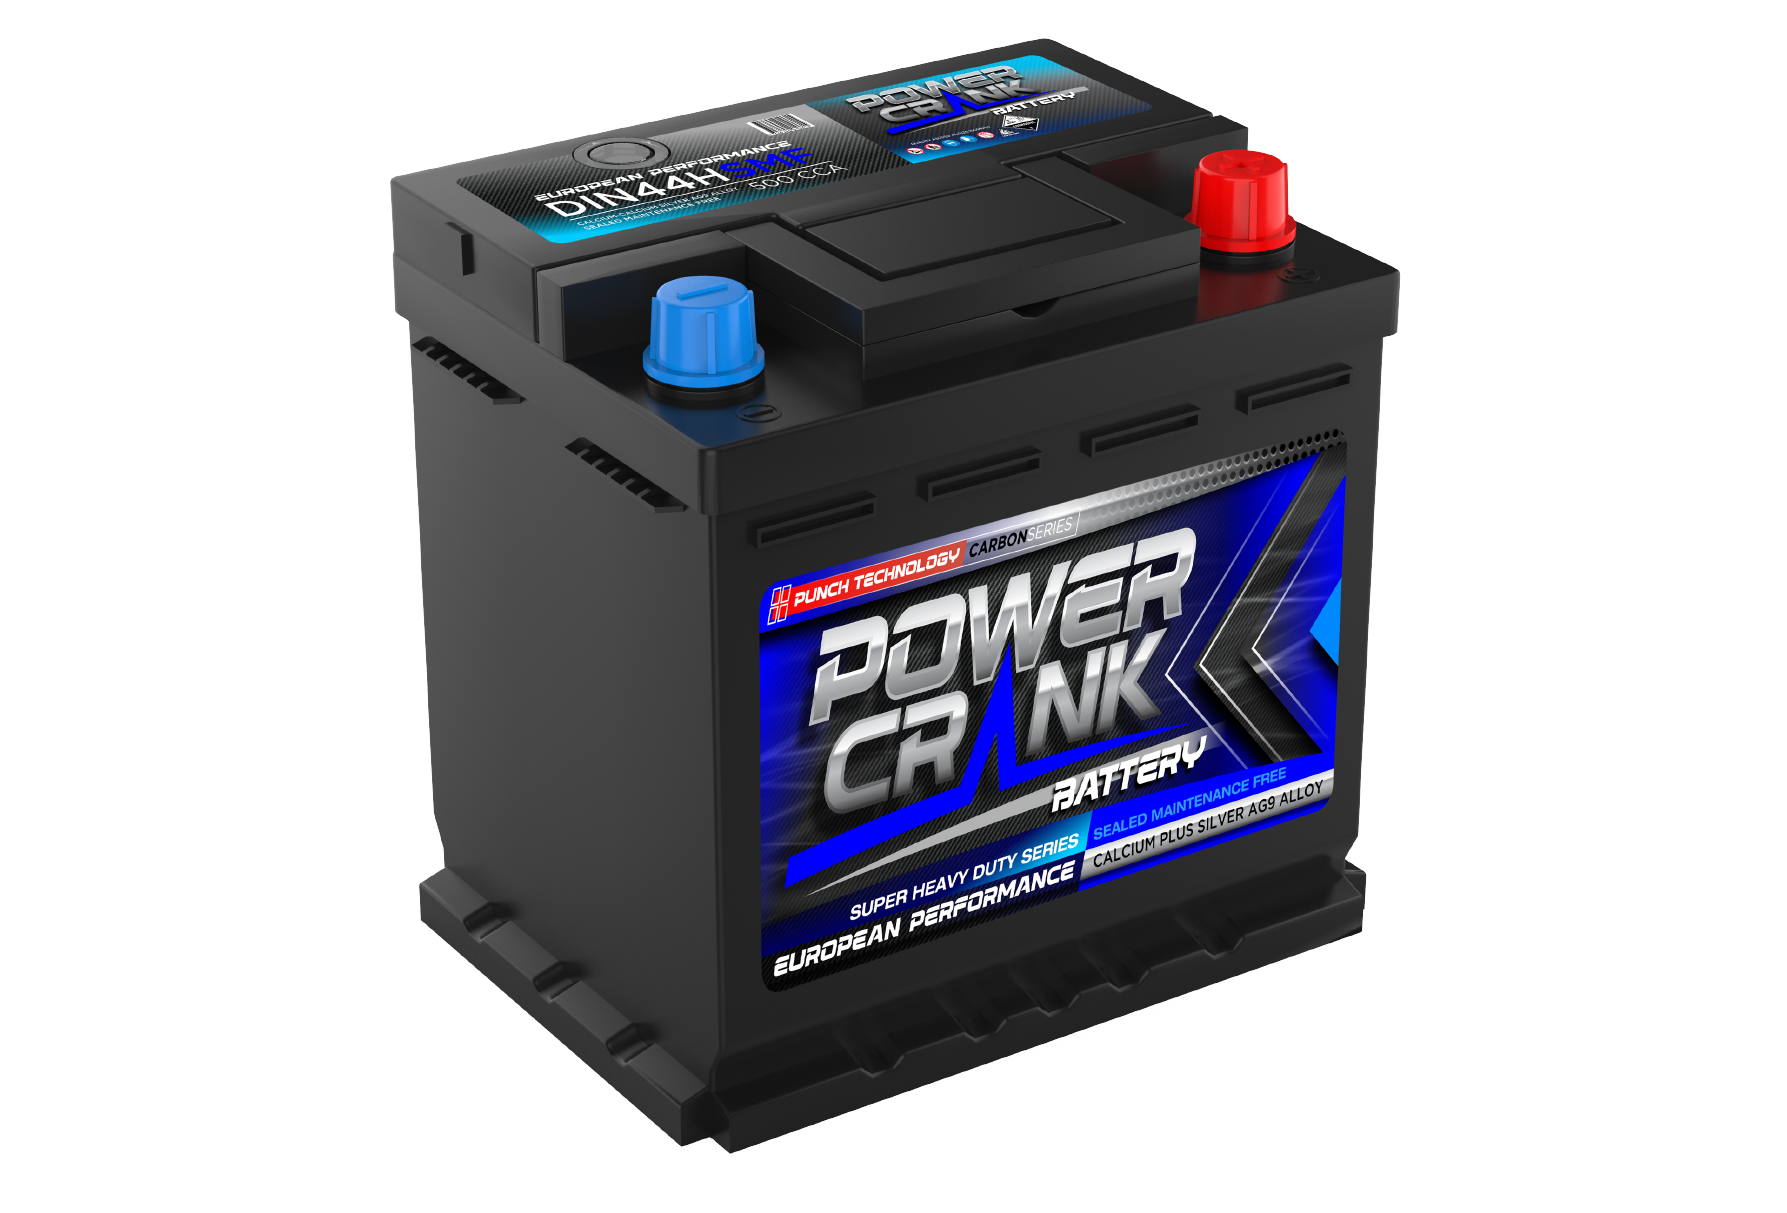 Power Crank Batteries | The Battery Experts